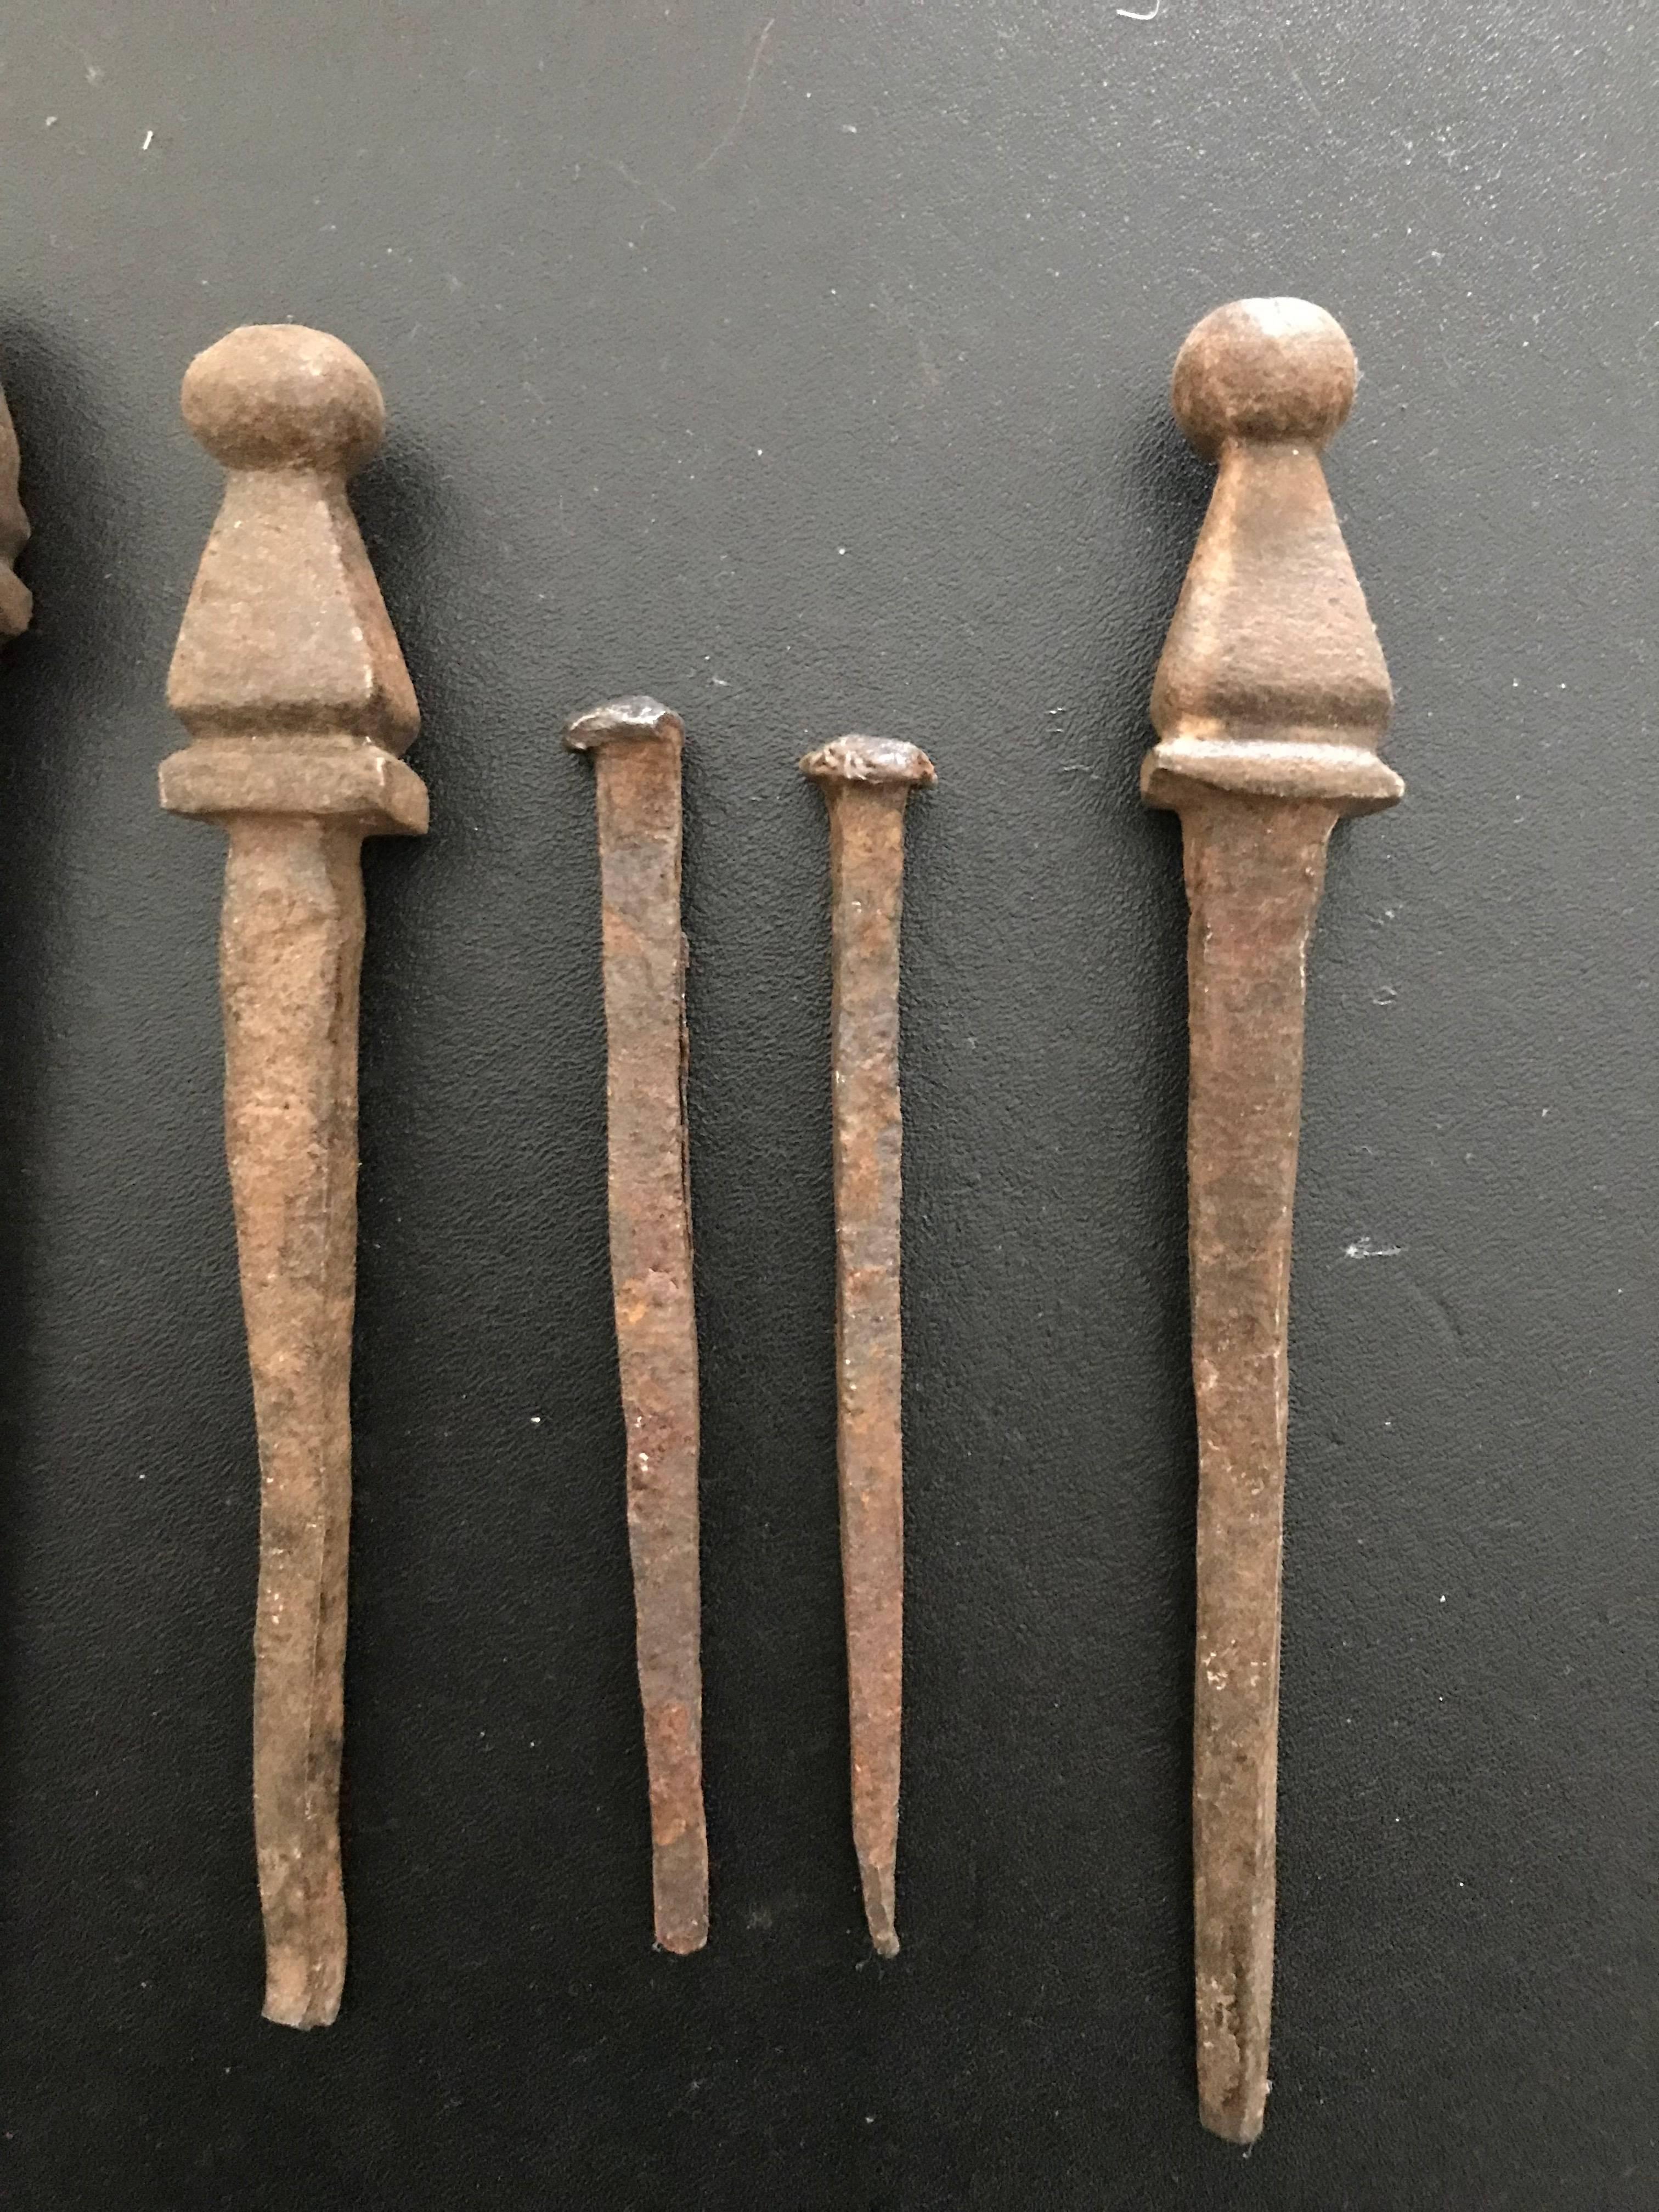 Amazing group of eight rare 16th/17th century (possibly earlier) Spanish or Italian wrought iron nails. These hand wrought nails show incredible workmanship. Each a miniature sculpture. These would have been used to hold together an early chest or